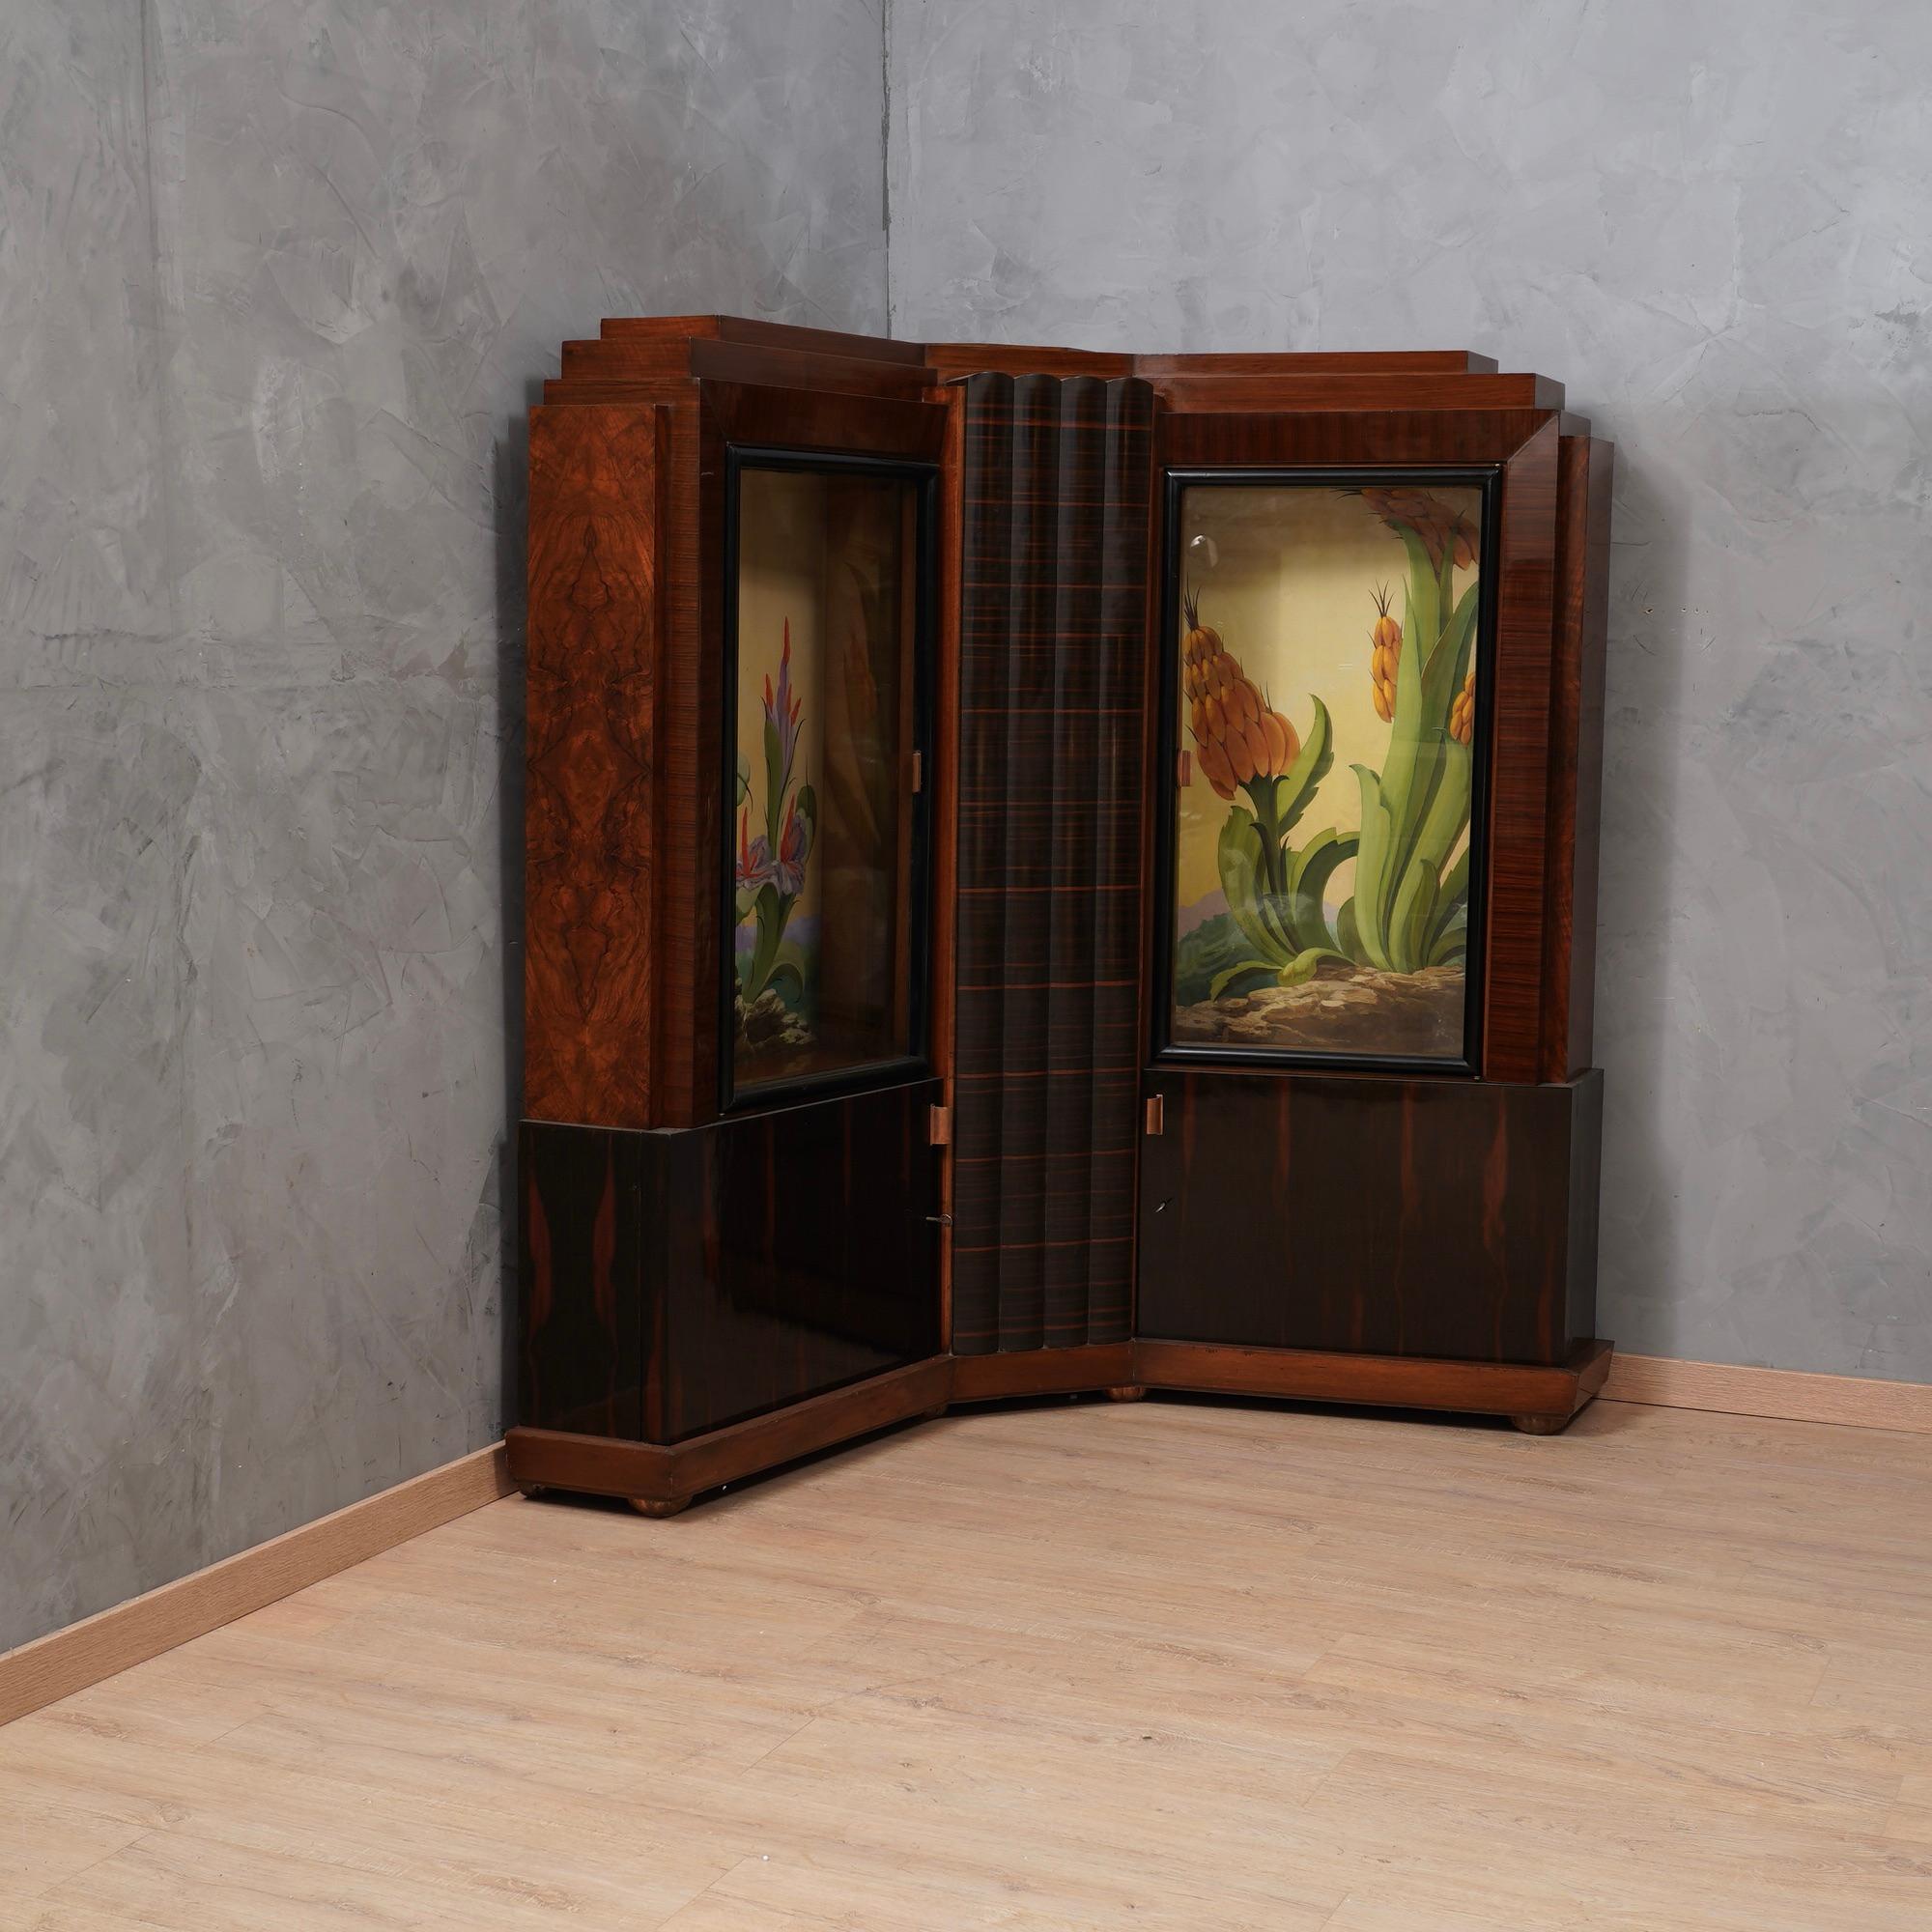 Astonishing corner cupboard attributed to Marcello Piacentini, important Italian furniture veneered in walnut and Macassar wood, to note its unique design and the two interior paintings, finely painted.

Corner cupboard formed by four doors, two